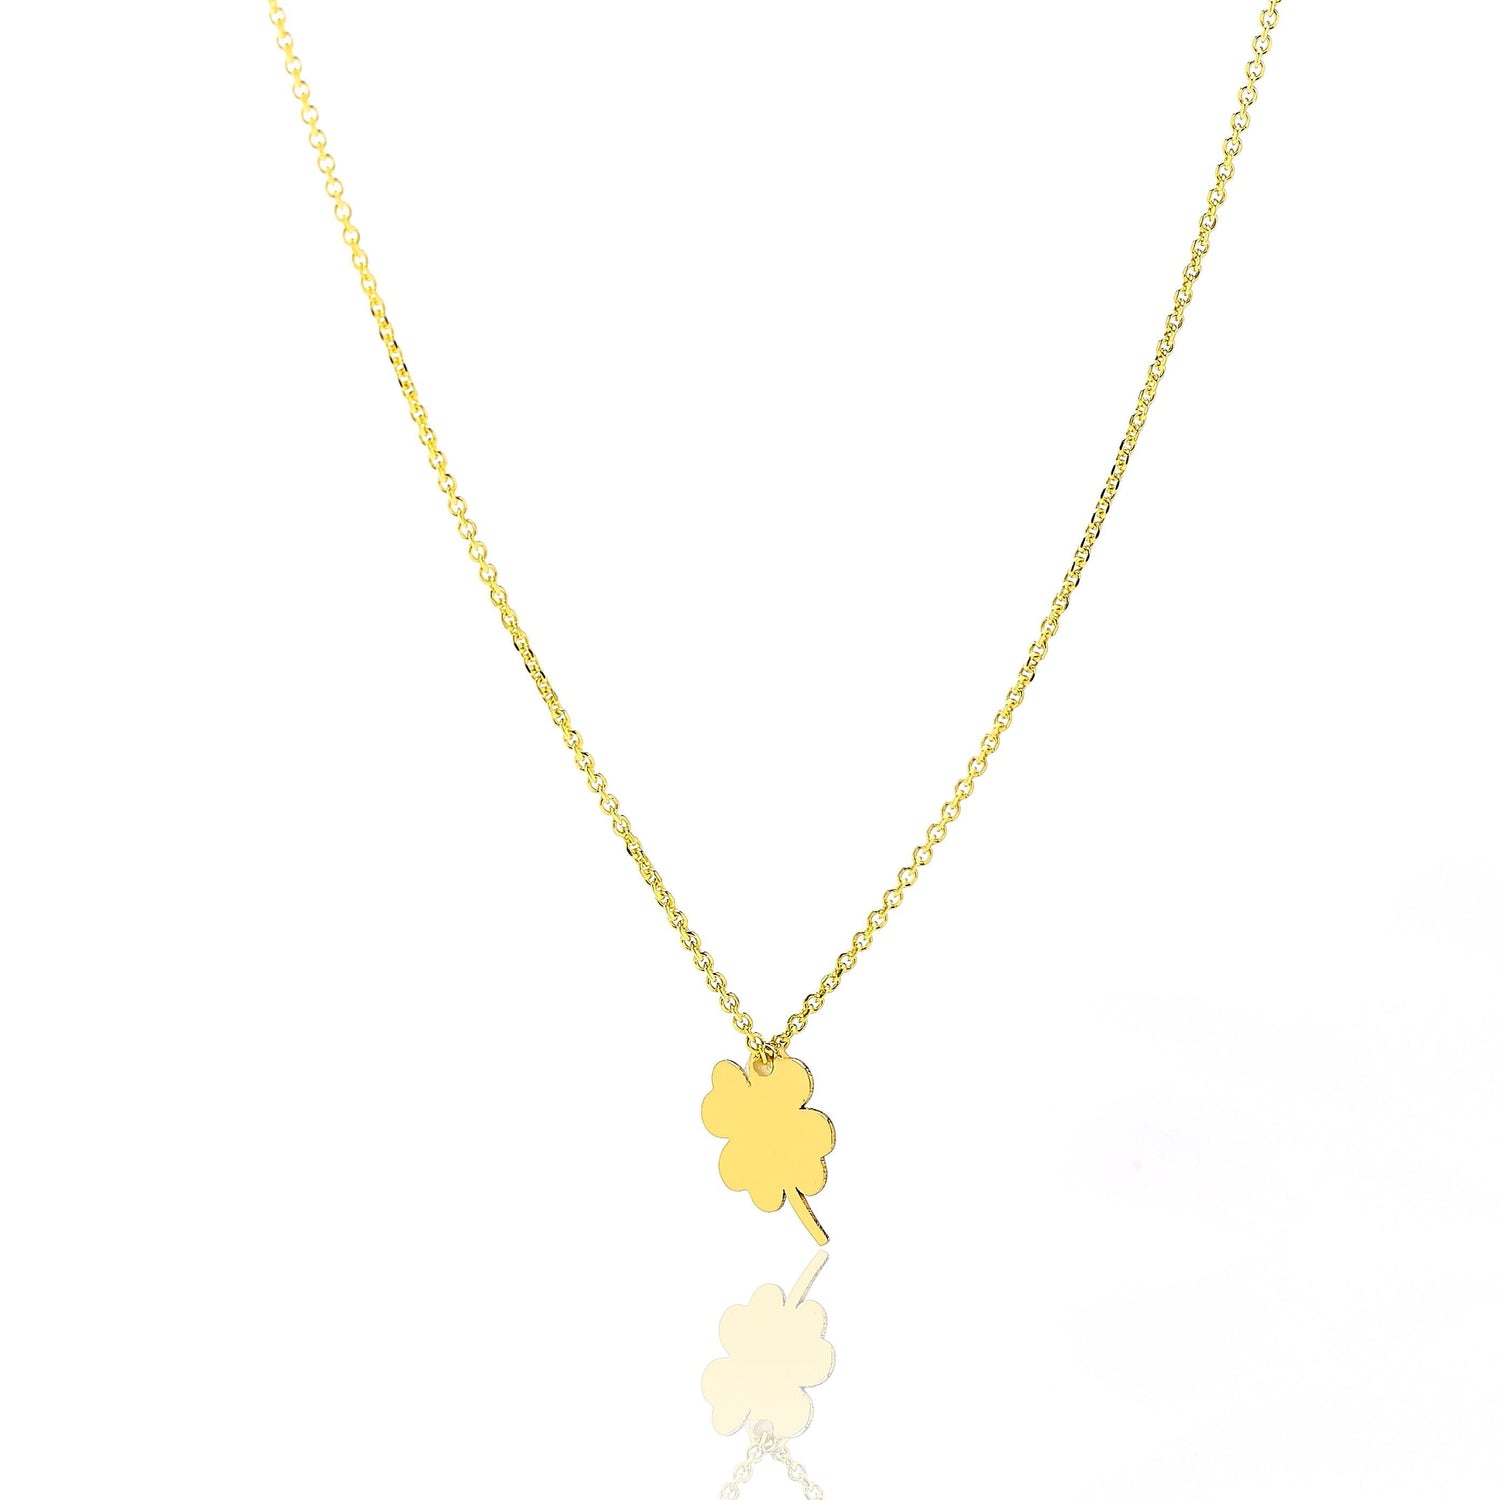 14k Yellow Gold 16 - 18 inch Extendable 4-Leaf Clover Charm Pendant Necklace